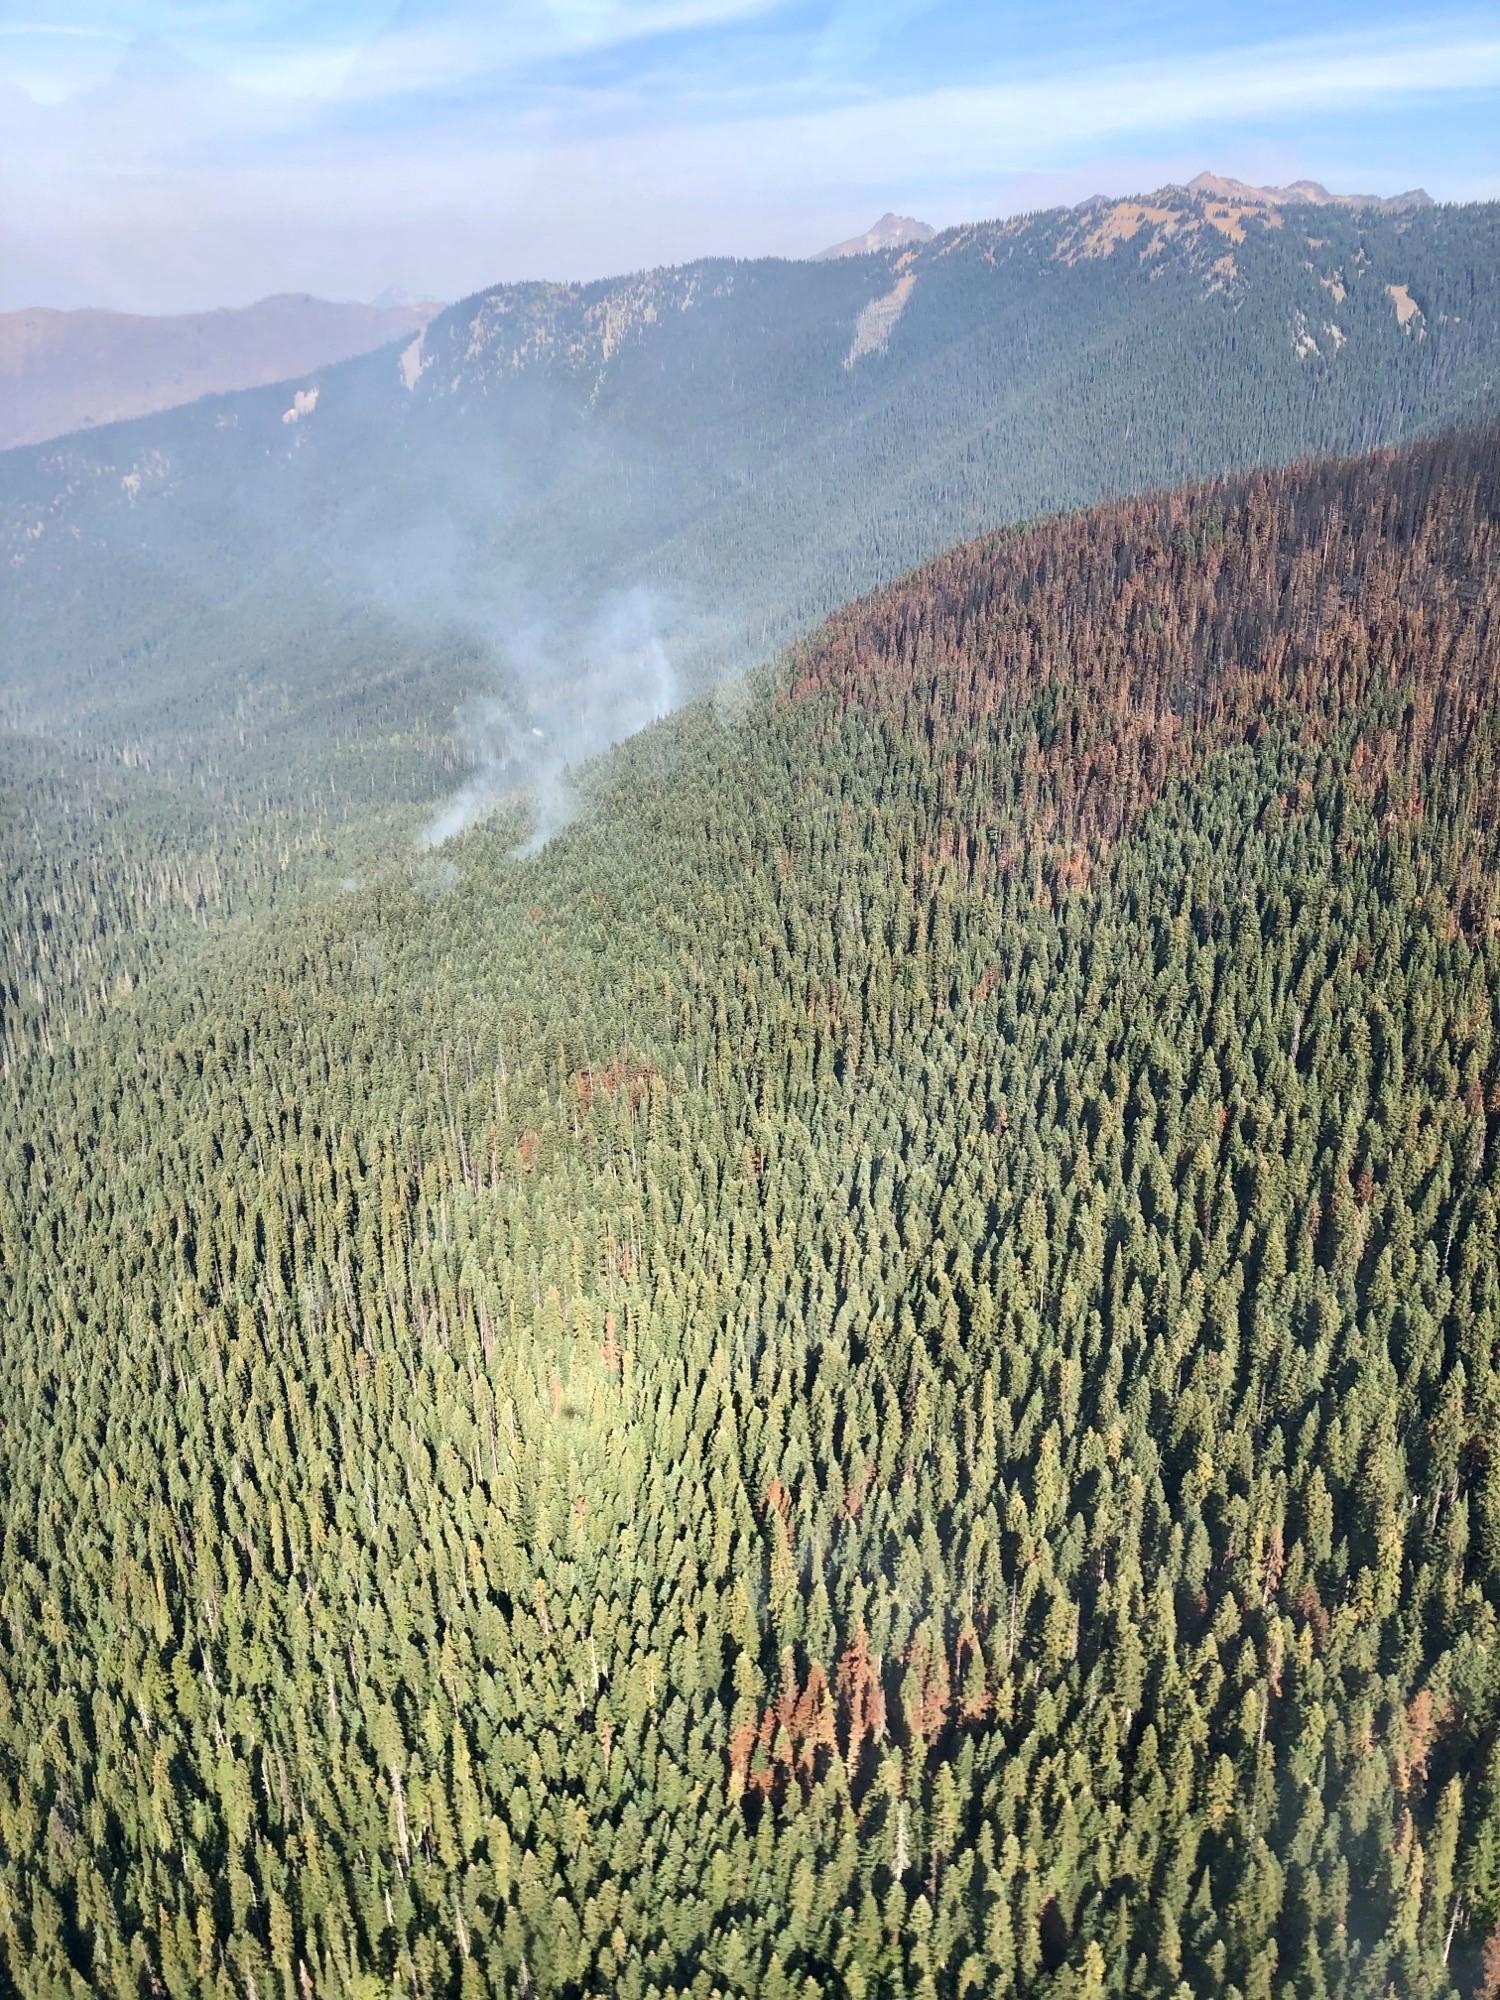 An aerial view of the green forest with wispy smoke from the Shull Fire  in the background.